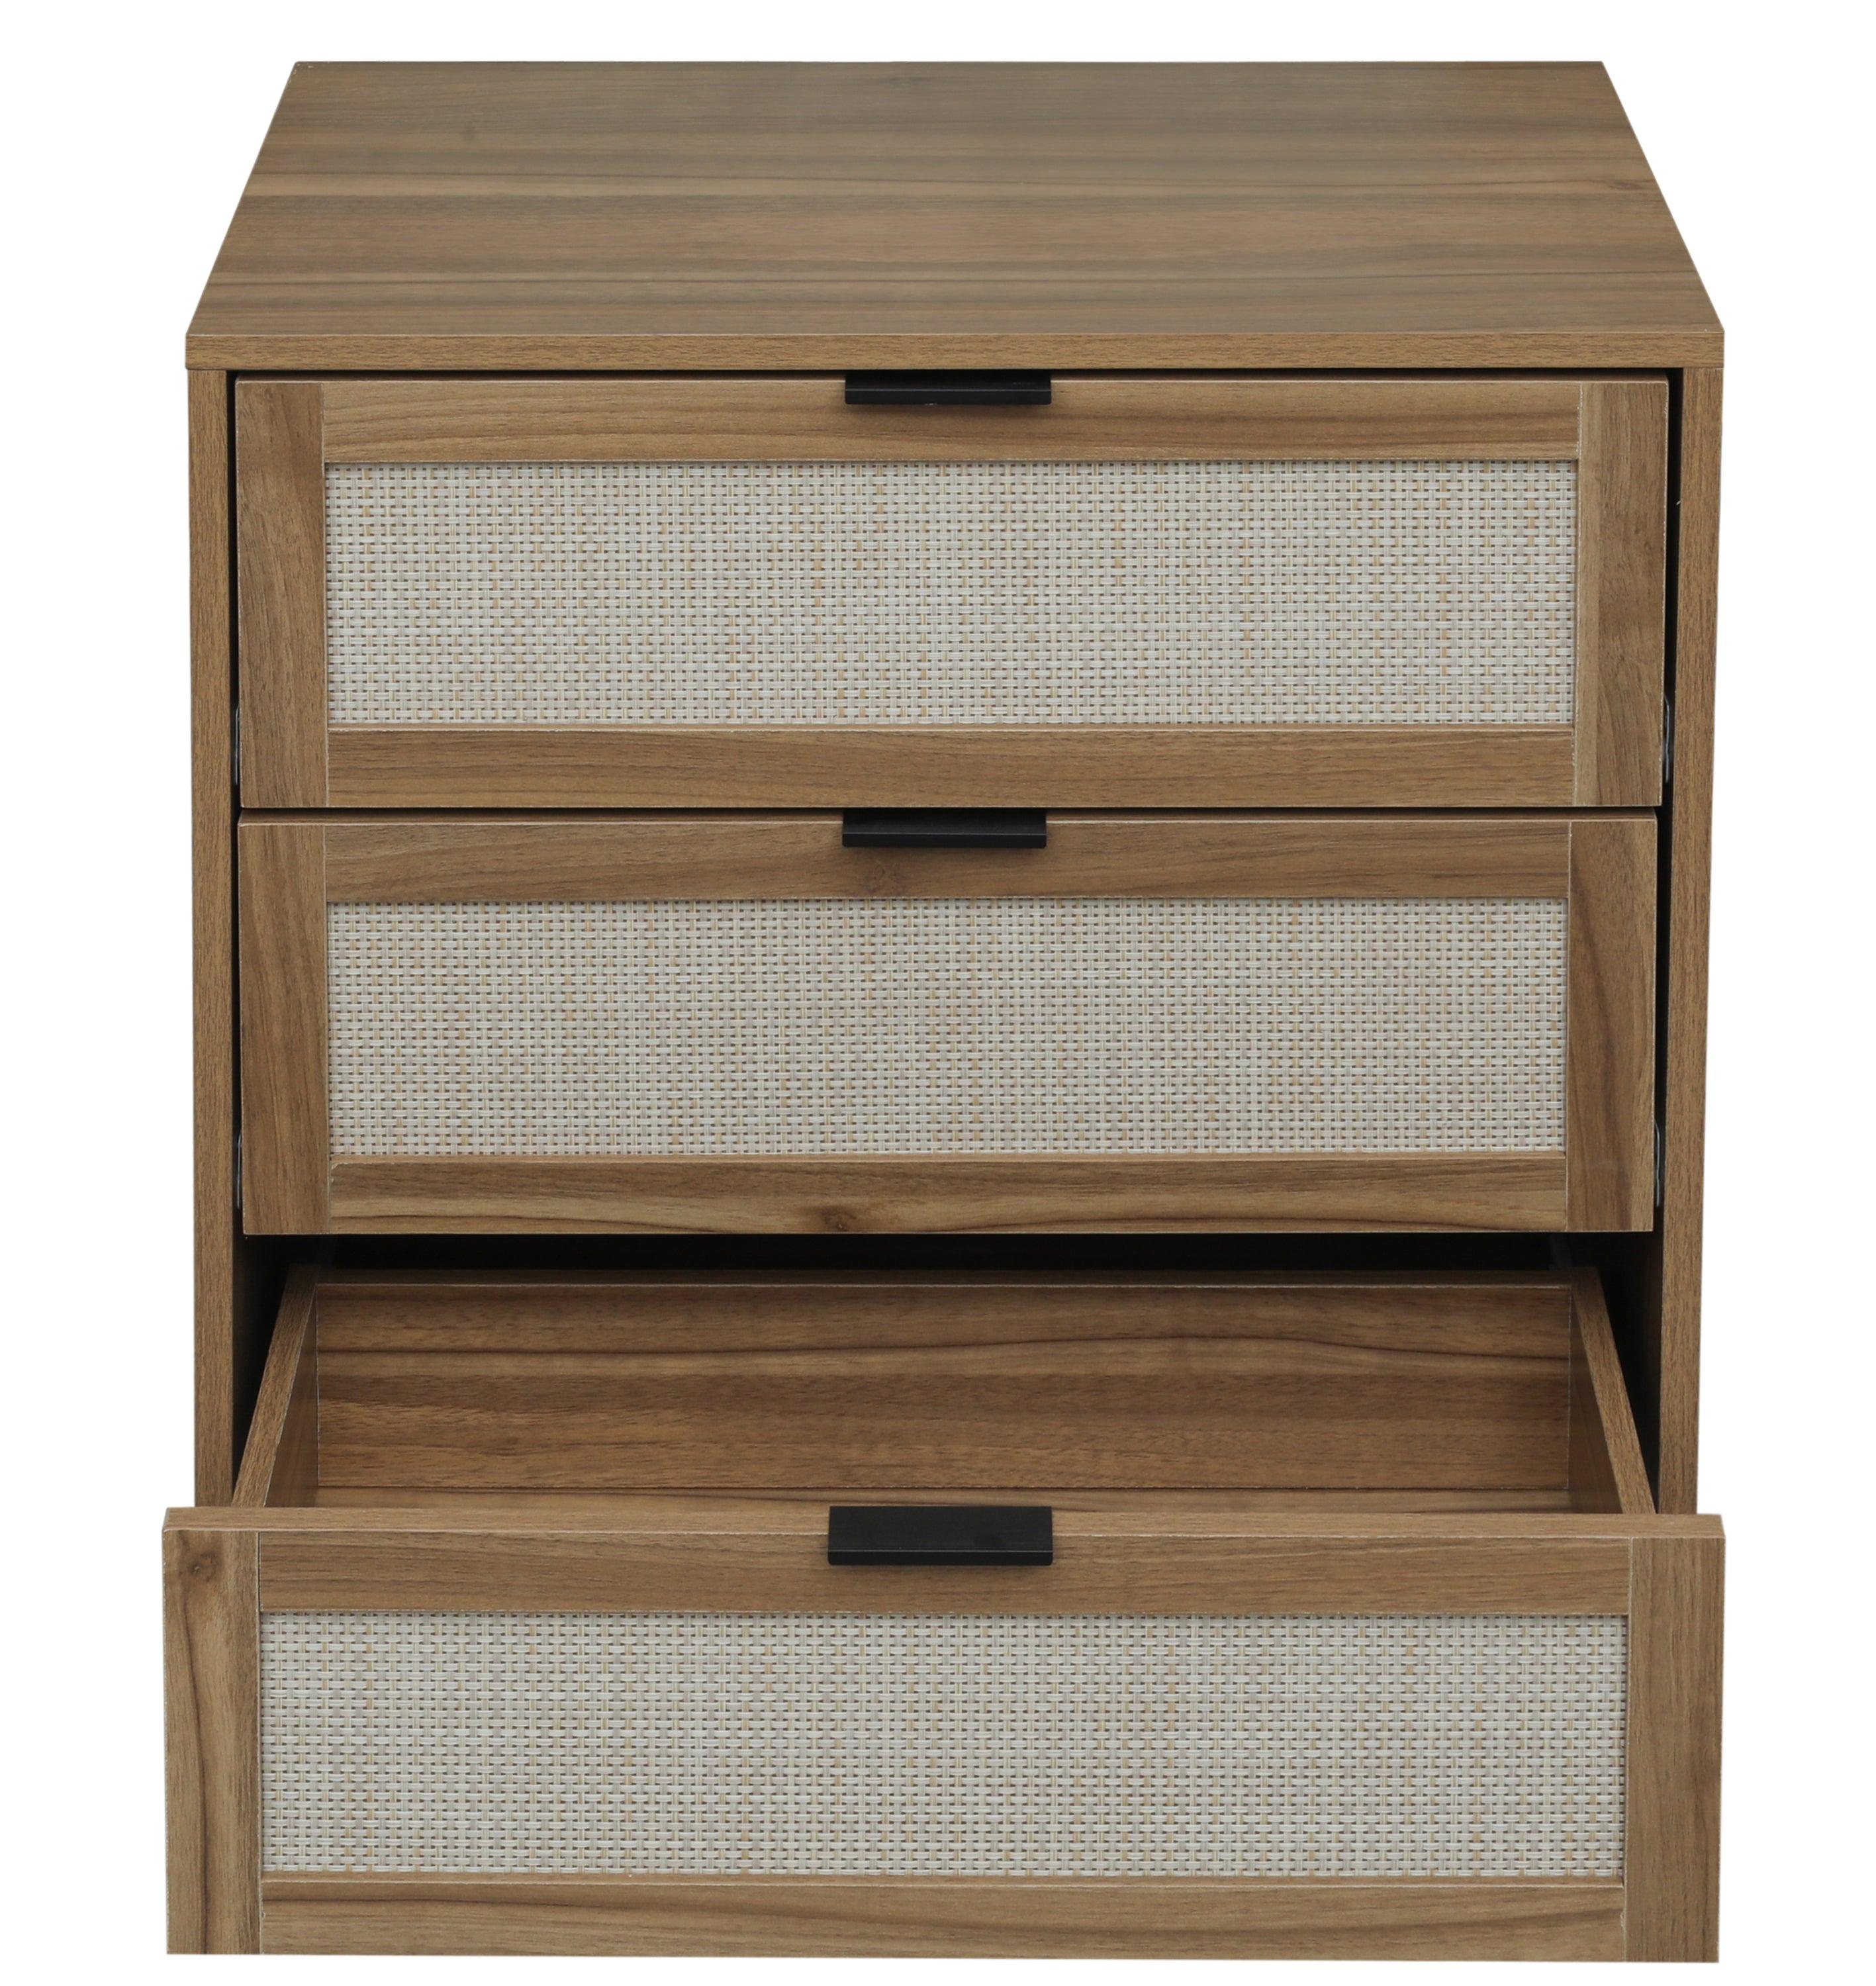 3 Drawer Cabinet, Suitable for bedroom, living room, study LamCham